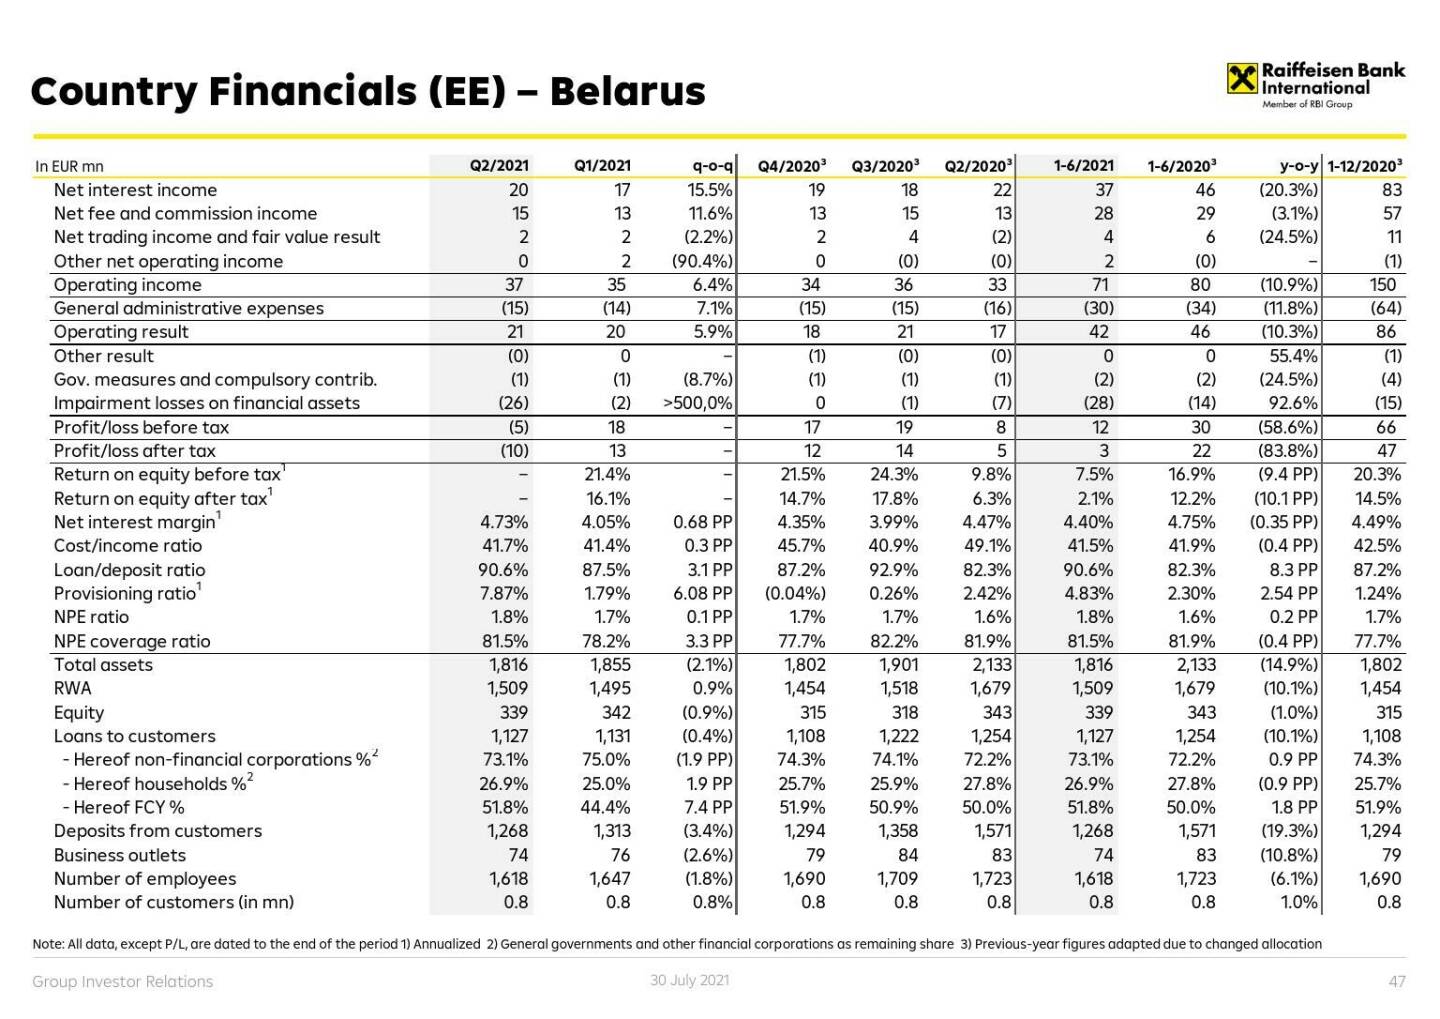 RBI - Country financials (CE) - Belarus